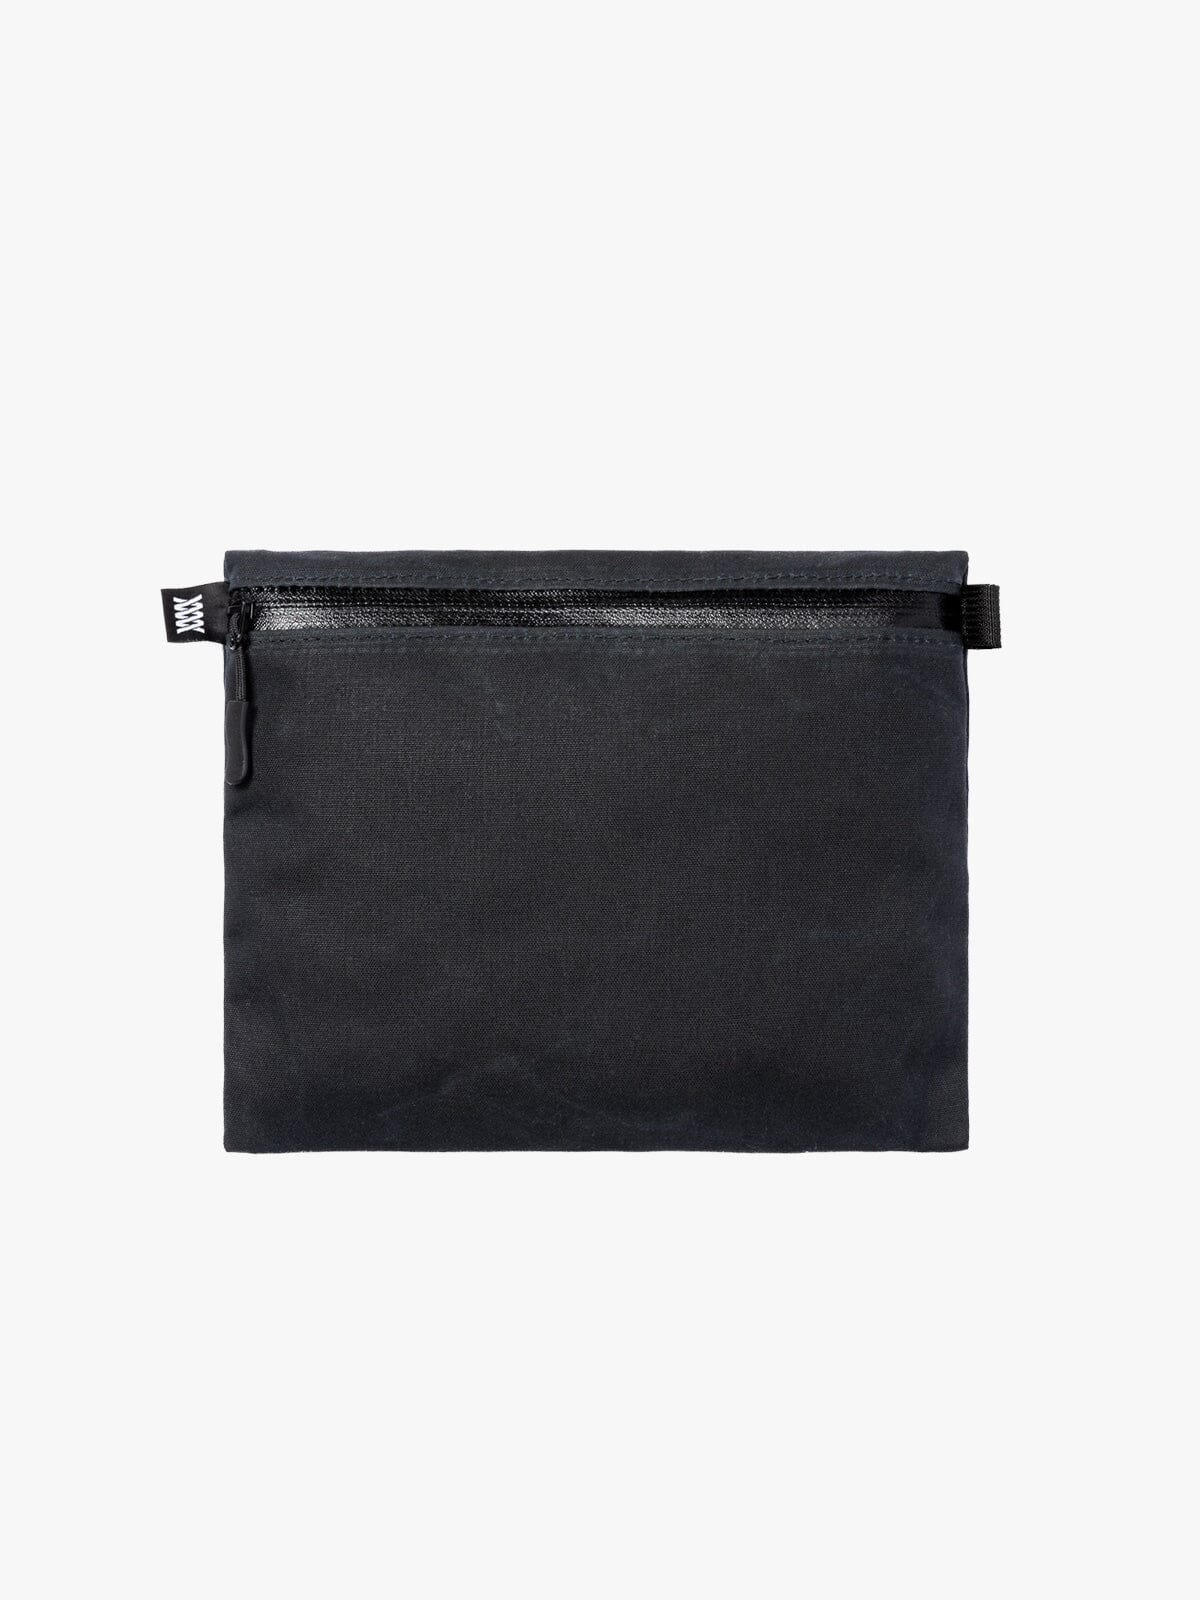 Waxed Canvas Wallet & Utility Pouch by Mission Workshop - Weatherproof Bags & Technical Apparel - San Francisco & Los Angeles - Built to endure - Guaranteed forever